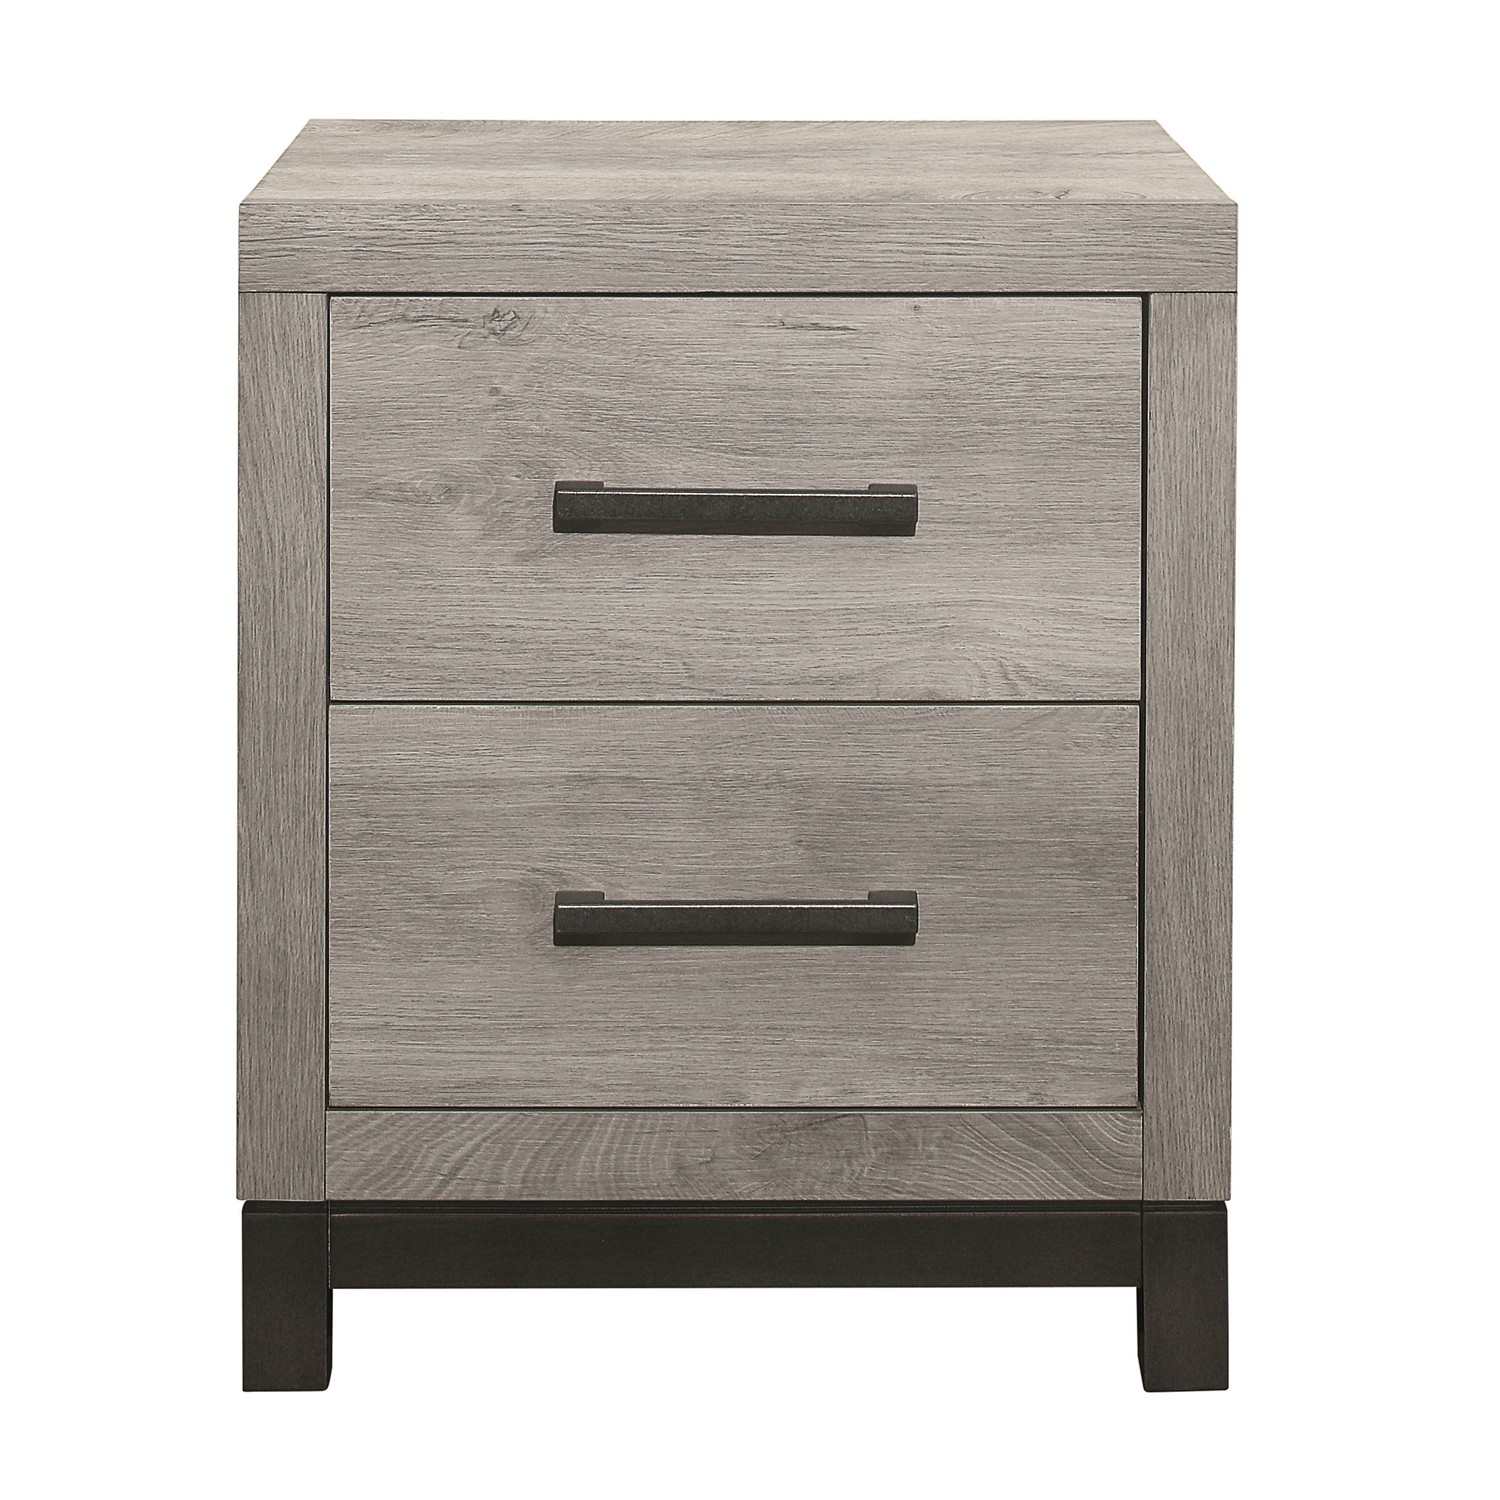 Homelegance Zephyr Night Stand - Two-tone : Light Gray And Gray